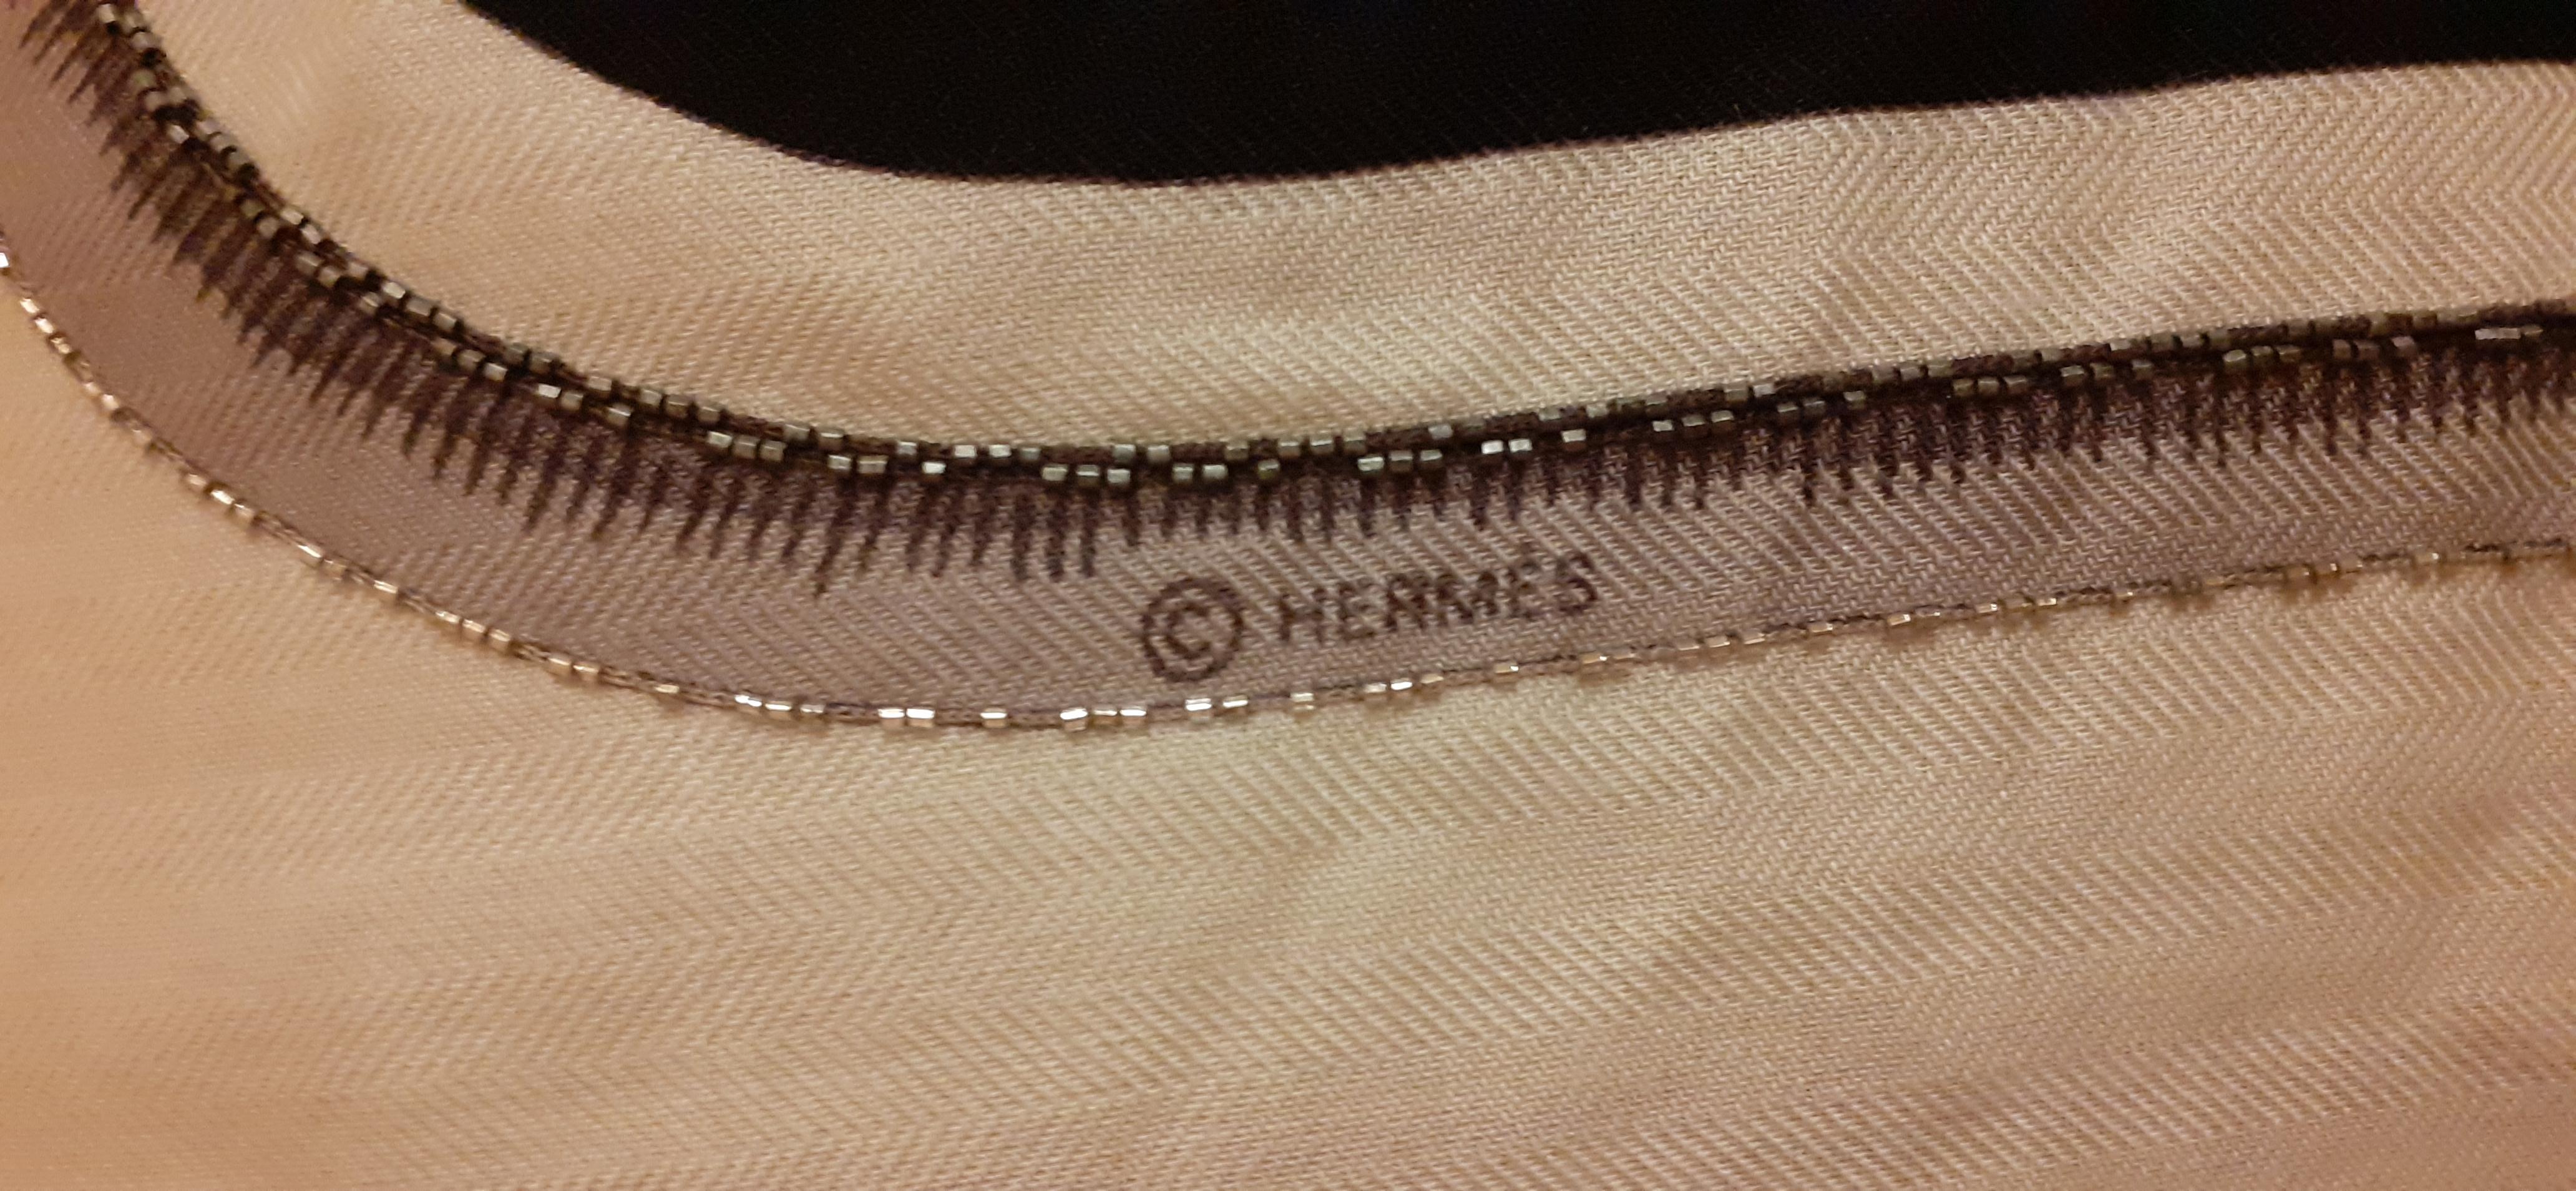 Hermès Cashmere and Silk Shawl Tigre Royal Hand Beaded Made in India 140 cm RARE For Sale 8